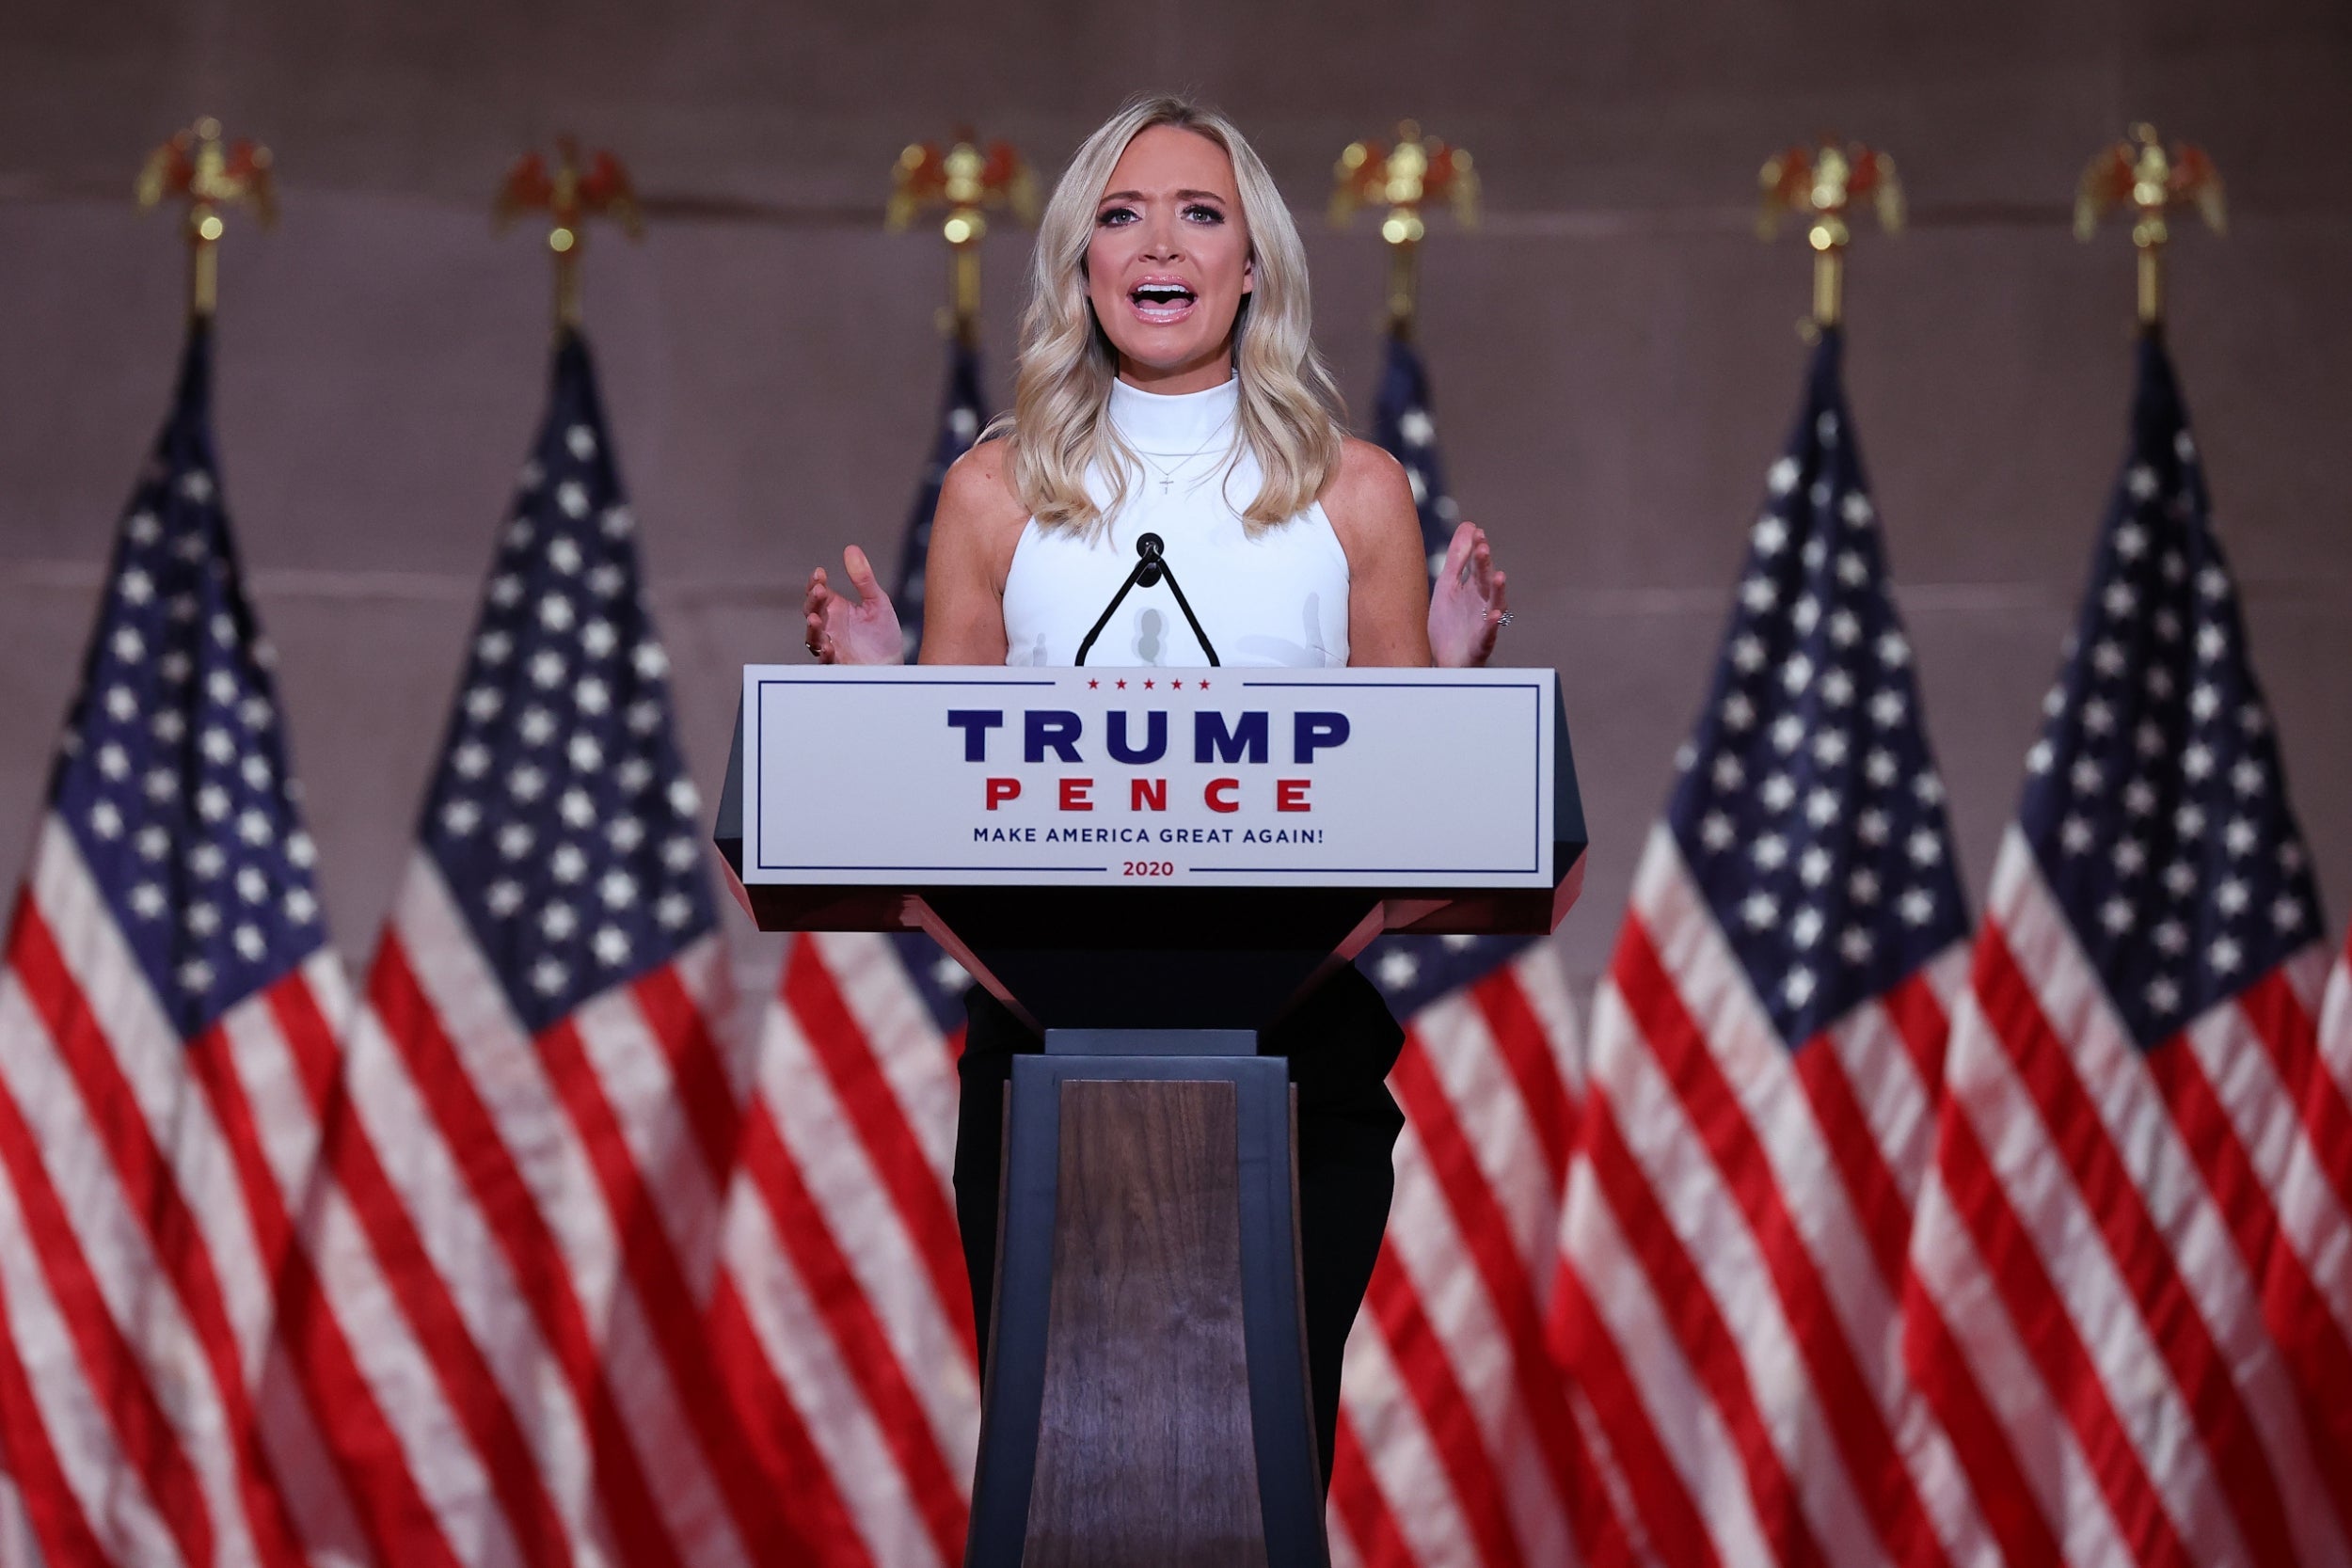 Kayleigh McEnany hails Trump's support for pre-existing condition coverage – despite his efforts to end policy